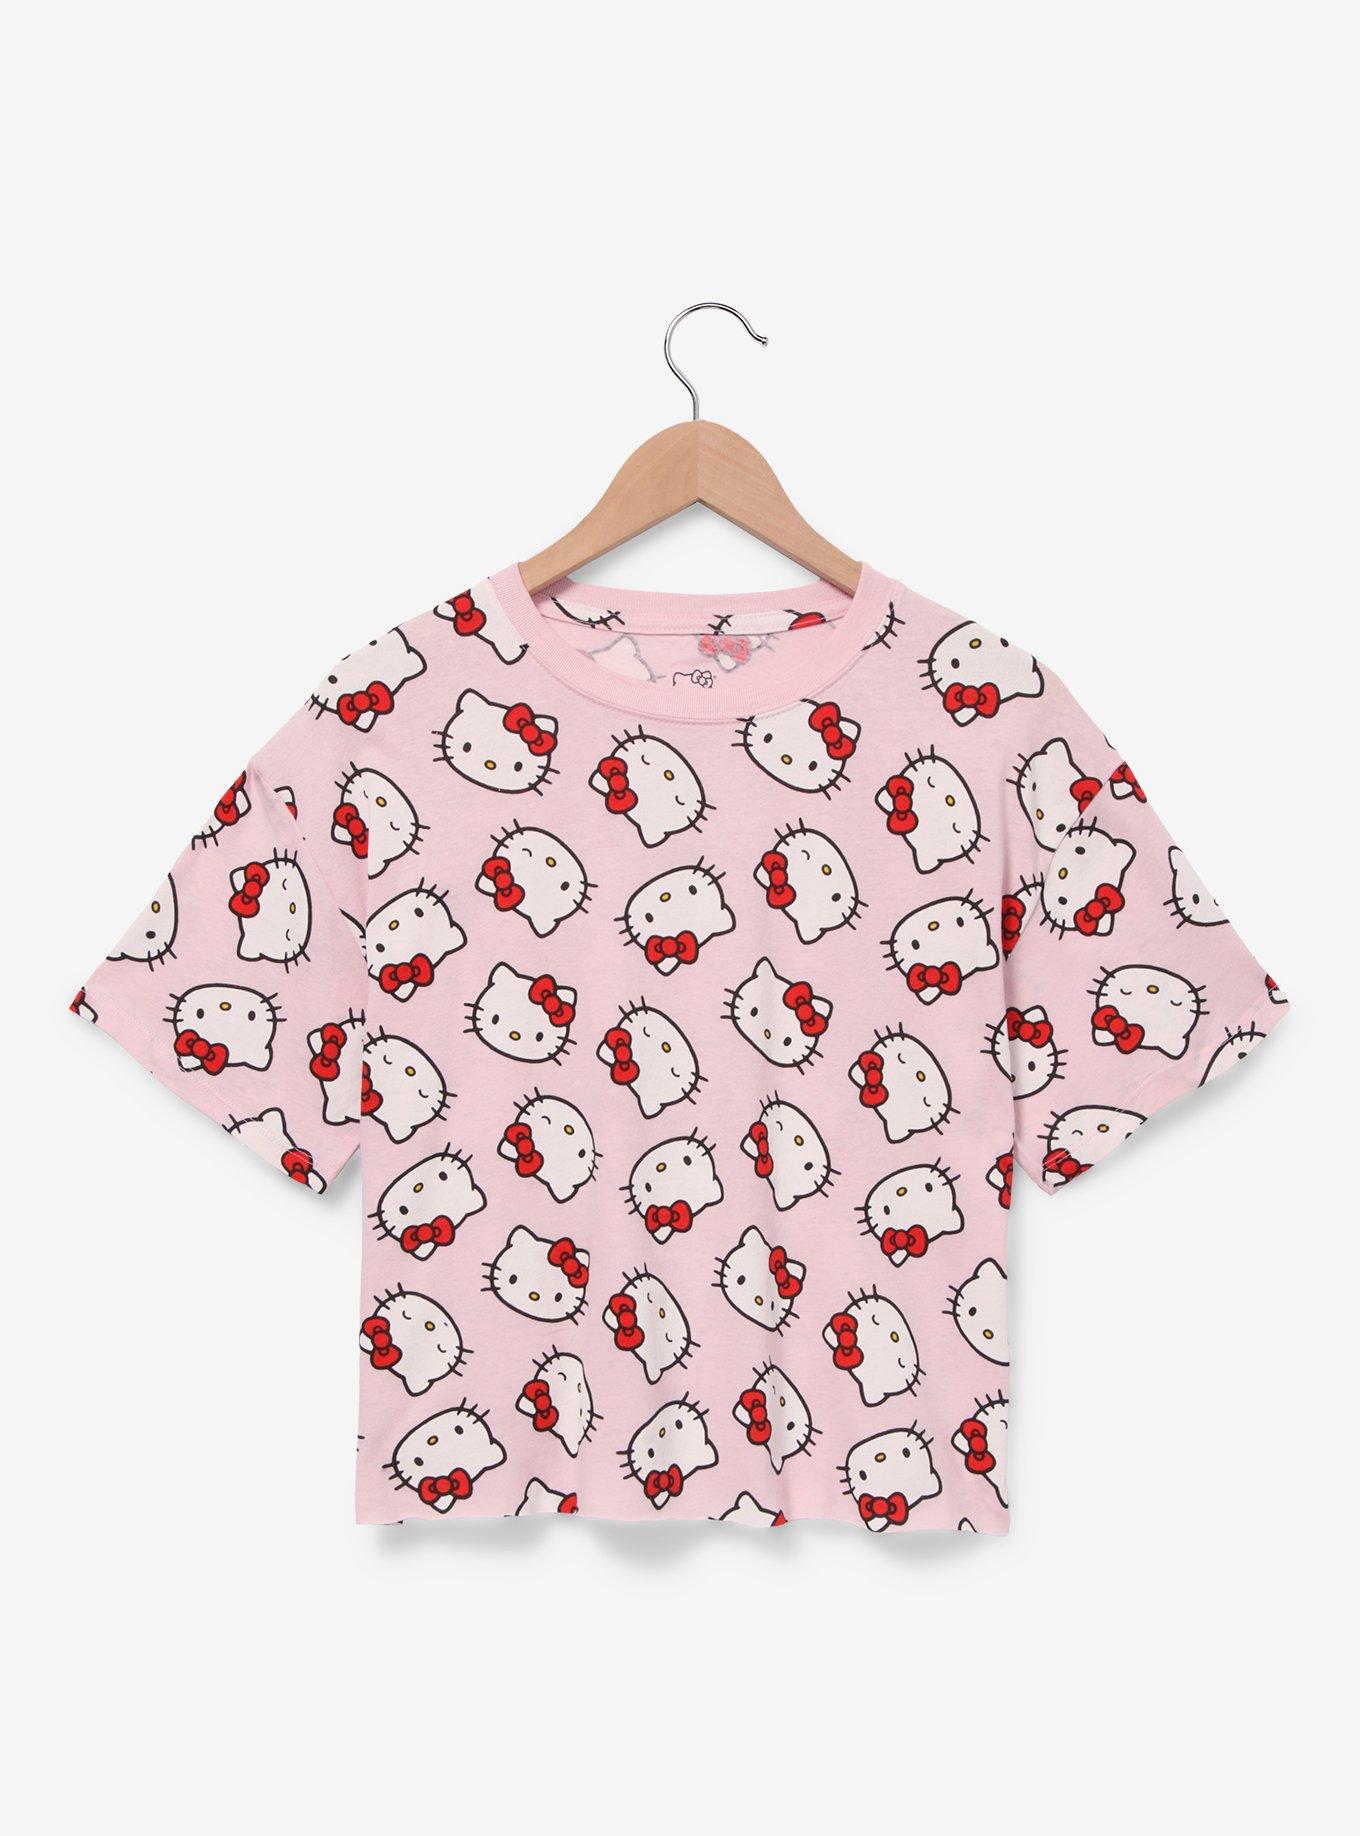 Sanrio Hello Kitty Faces Allover Print Women's Crop T-Shirt - BoxLunch Exclusive, LIGHT PINK, hi-res